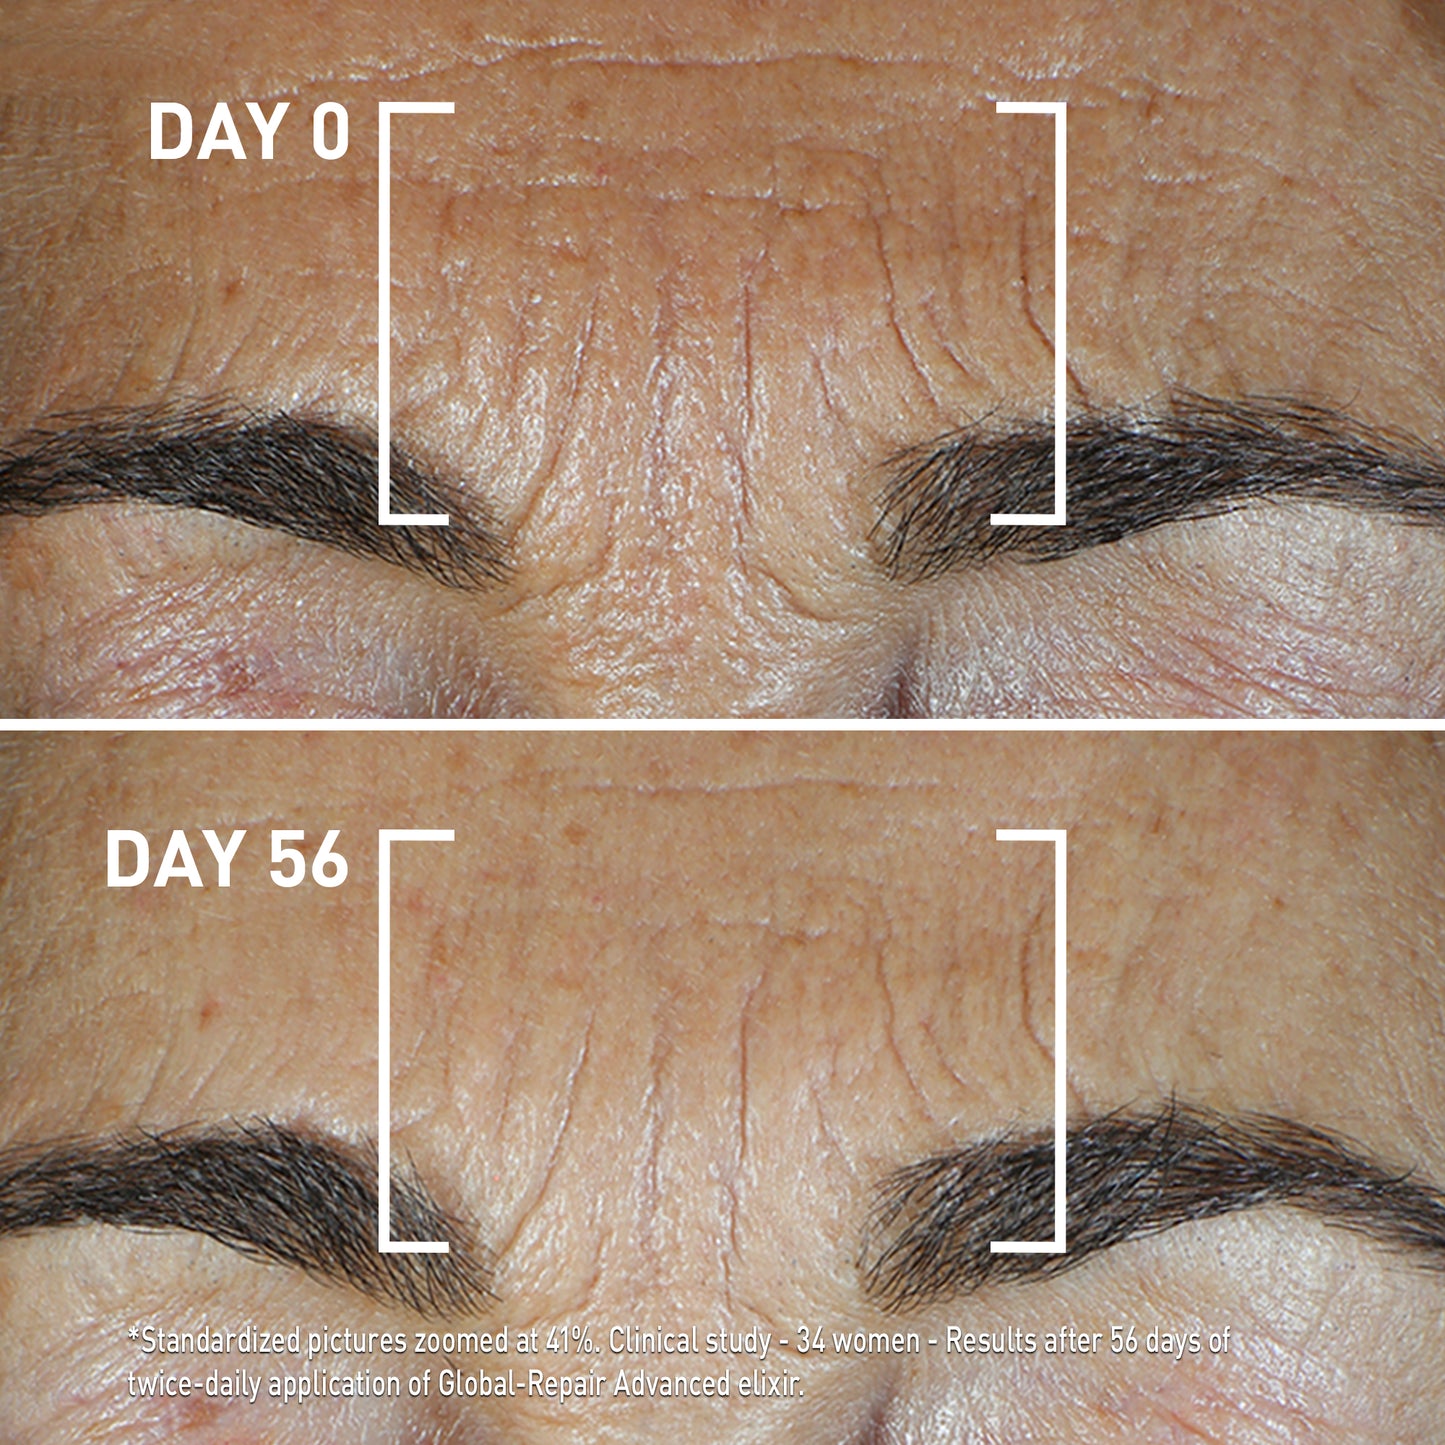 Day 0 and Day 56 showing reduced wrinkles after using FILORGA GLOBAL-REPAIR ADVANCED ELIXIR